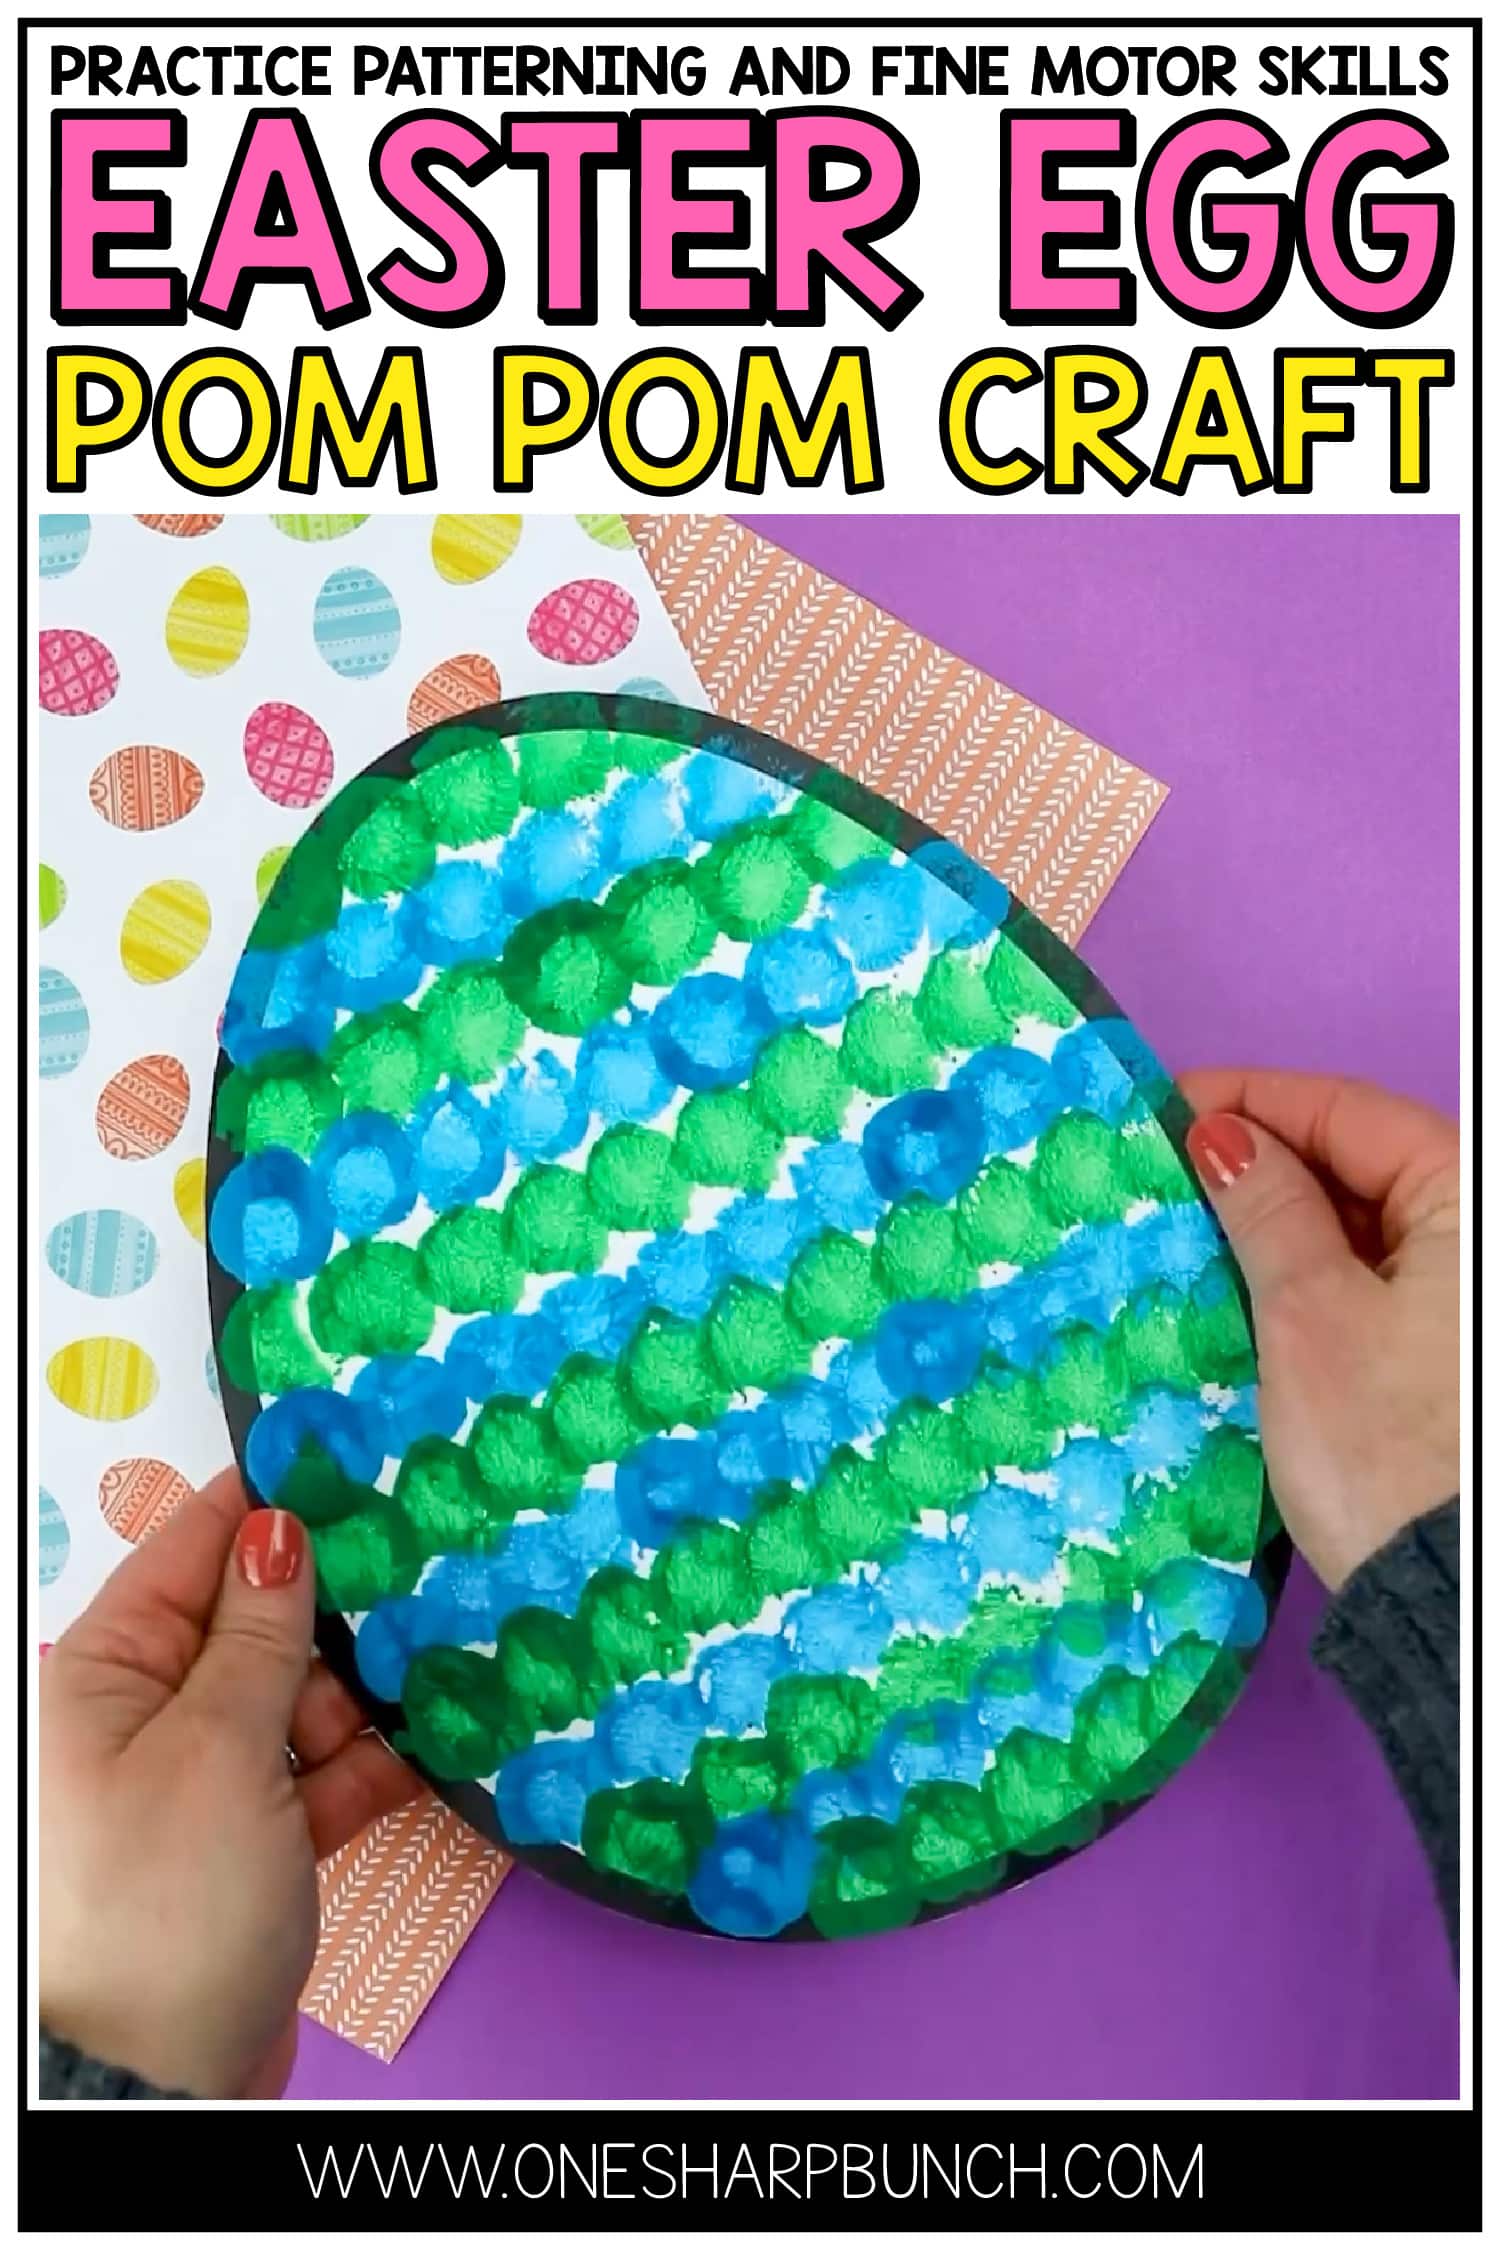 The Best Spring Crafts for Kids